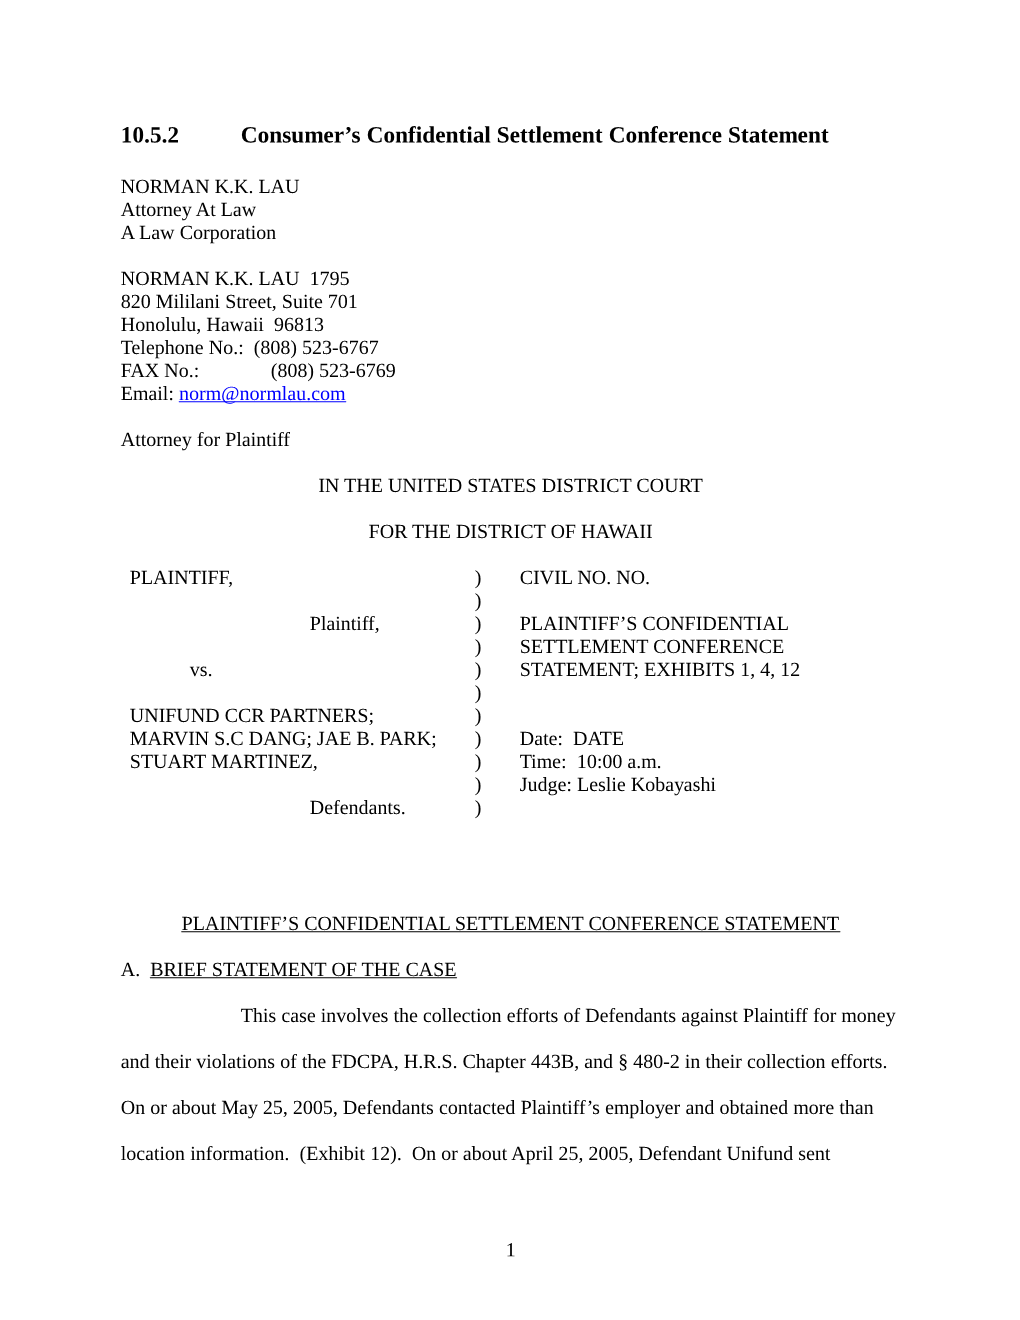 10.5.2 Consumer's Confidential Settlement Conference Statement